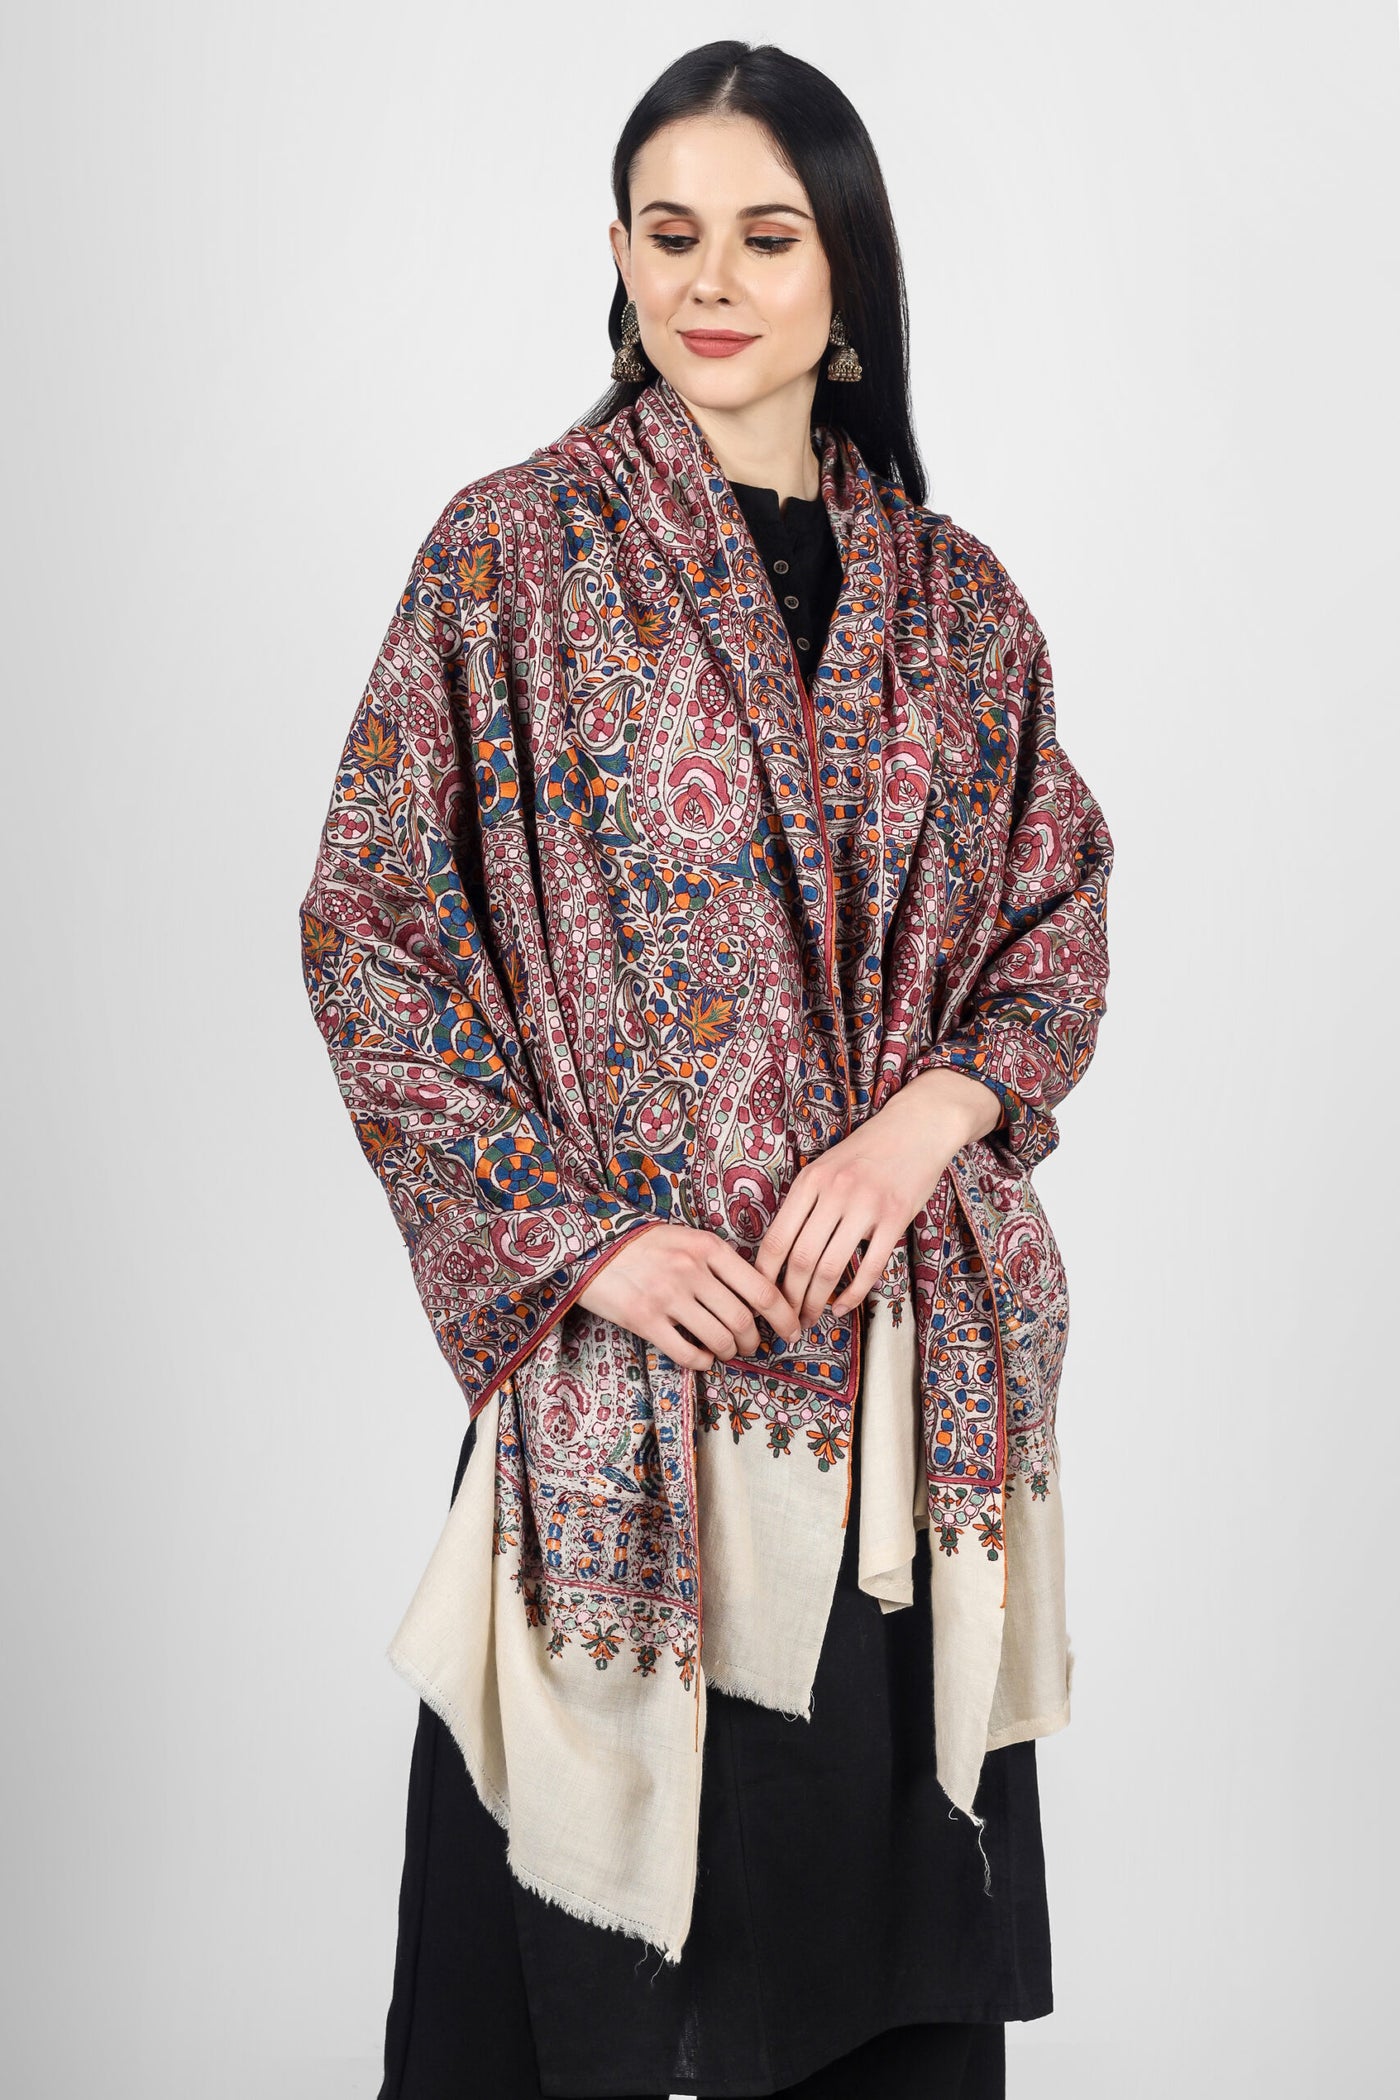 This White  Pure Pashmina Shawl With Papier Mache Jama Hand Embroidery inspired by paisley and floral motifs will embrace your beauty in every way.